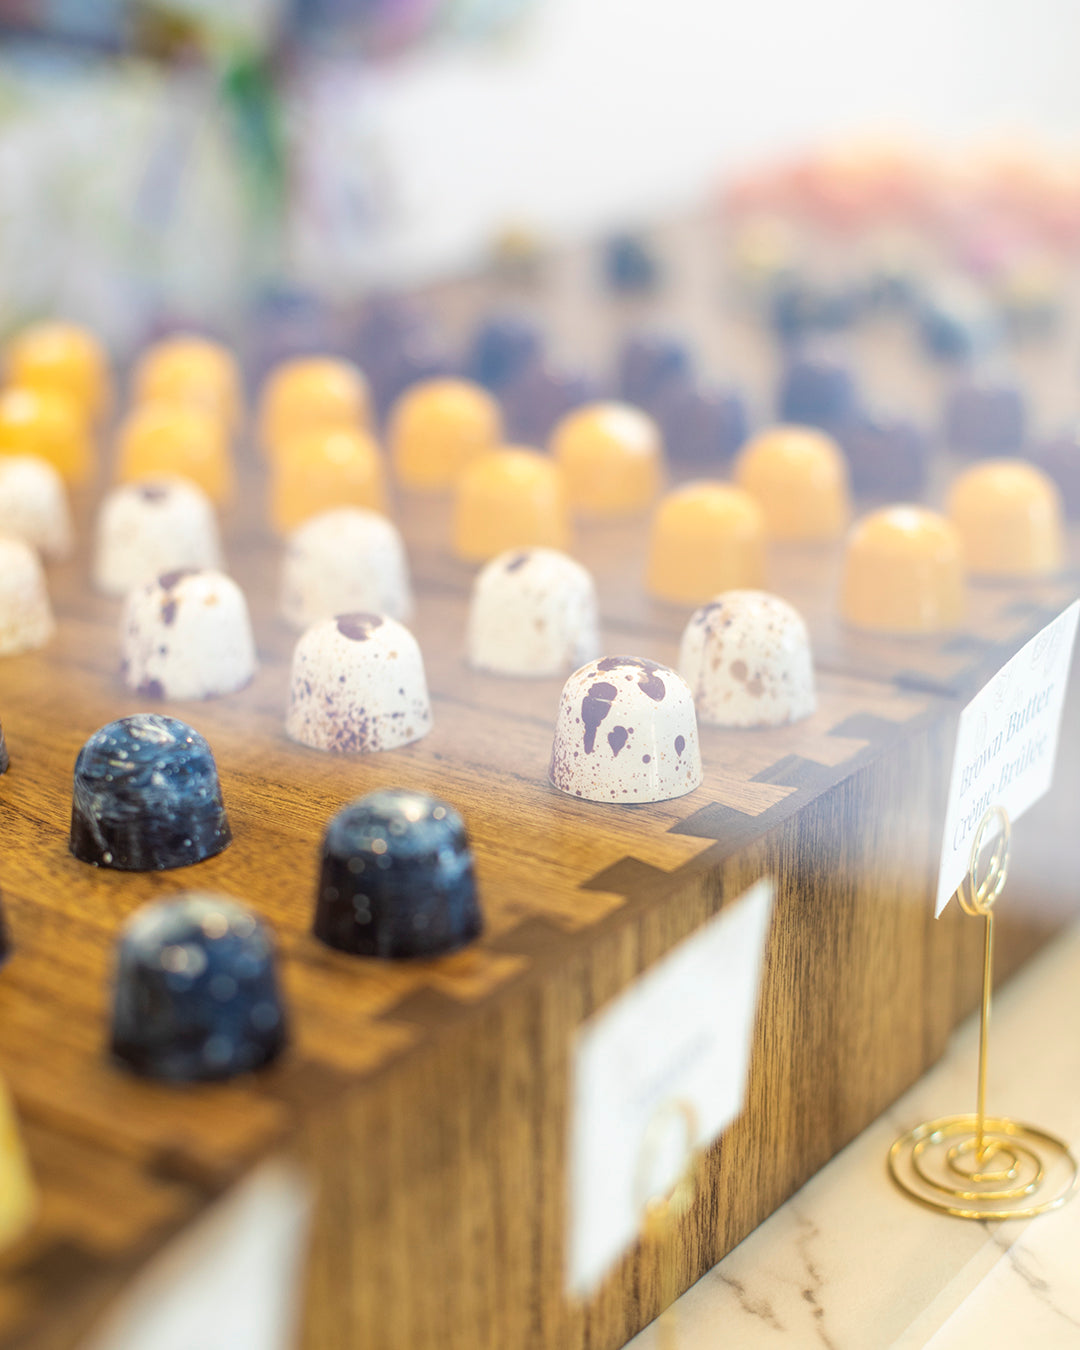 Lines of chocolate bonbons on display in the One More Cocoa store